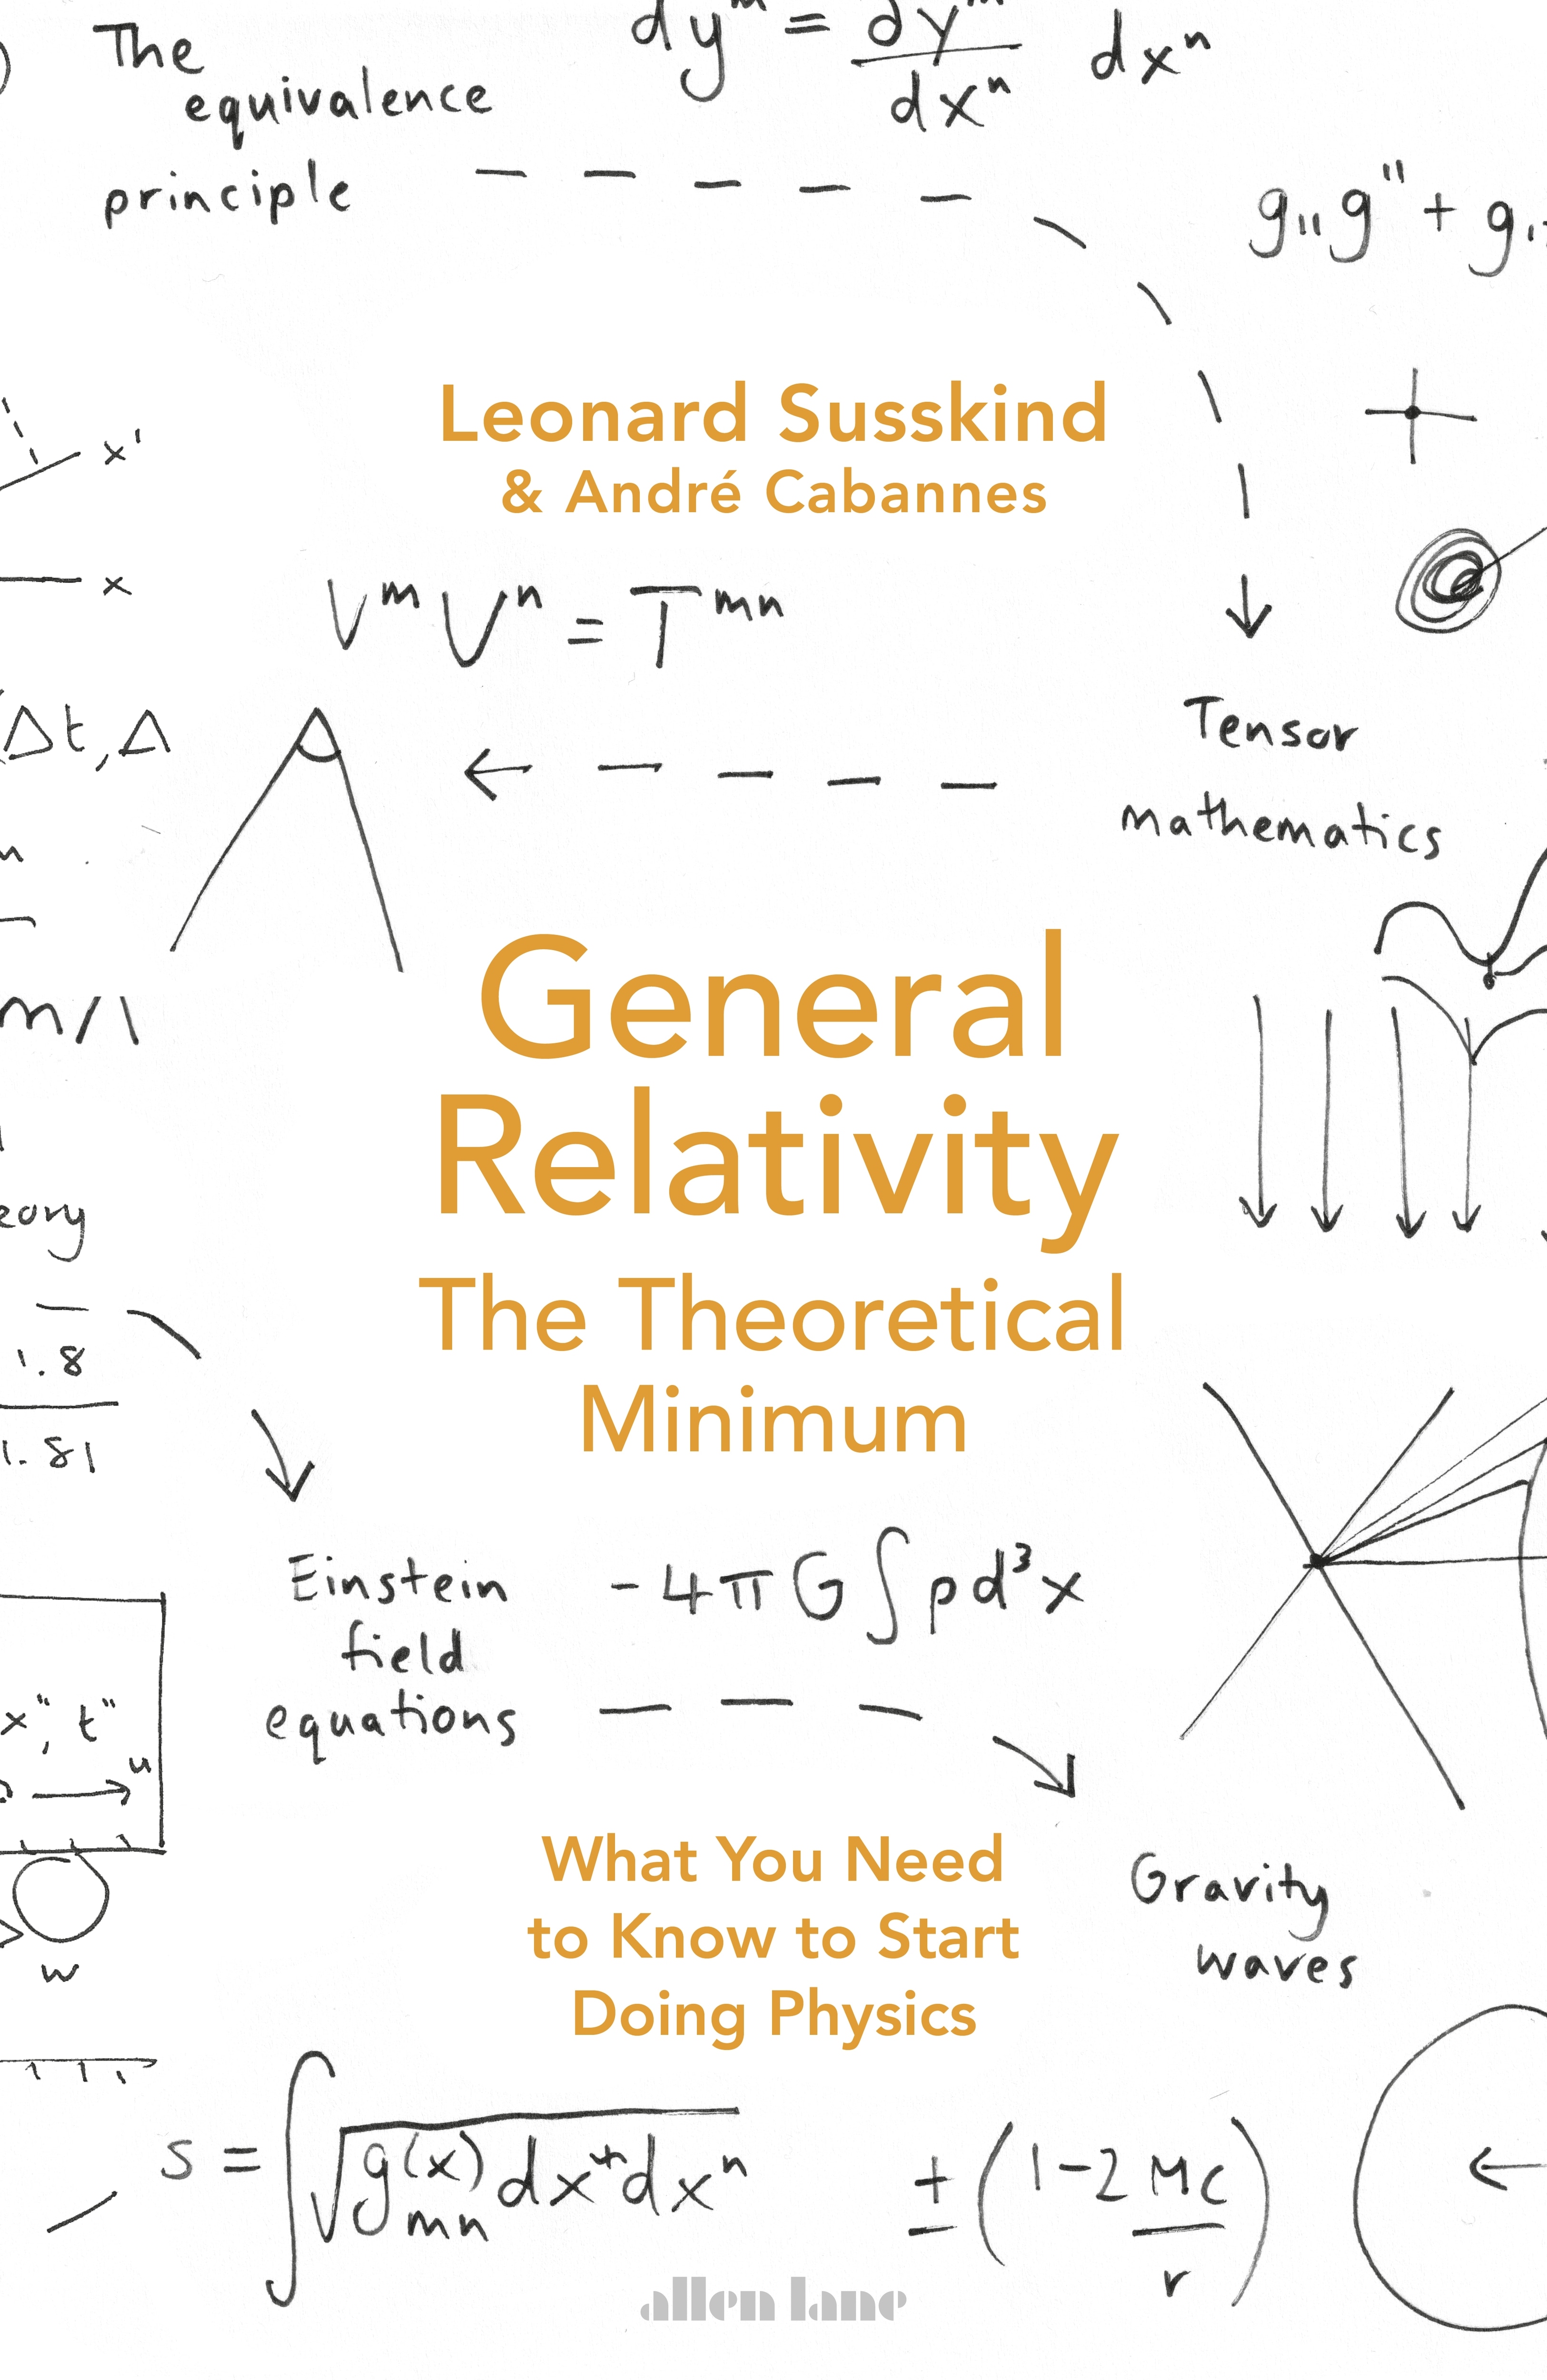 Book “General Relativity” by Leonard Susskind, Andre Cabannes — February 2, 2023